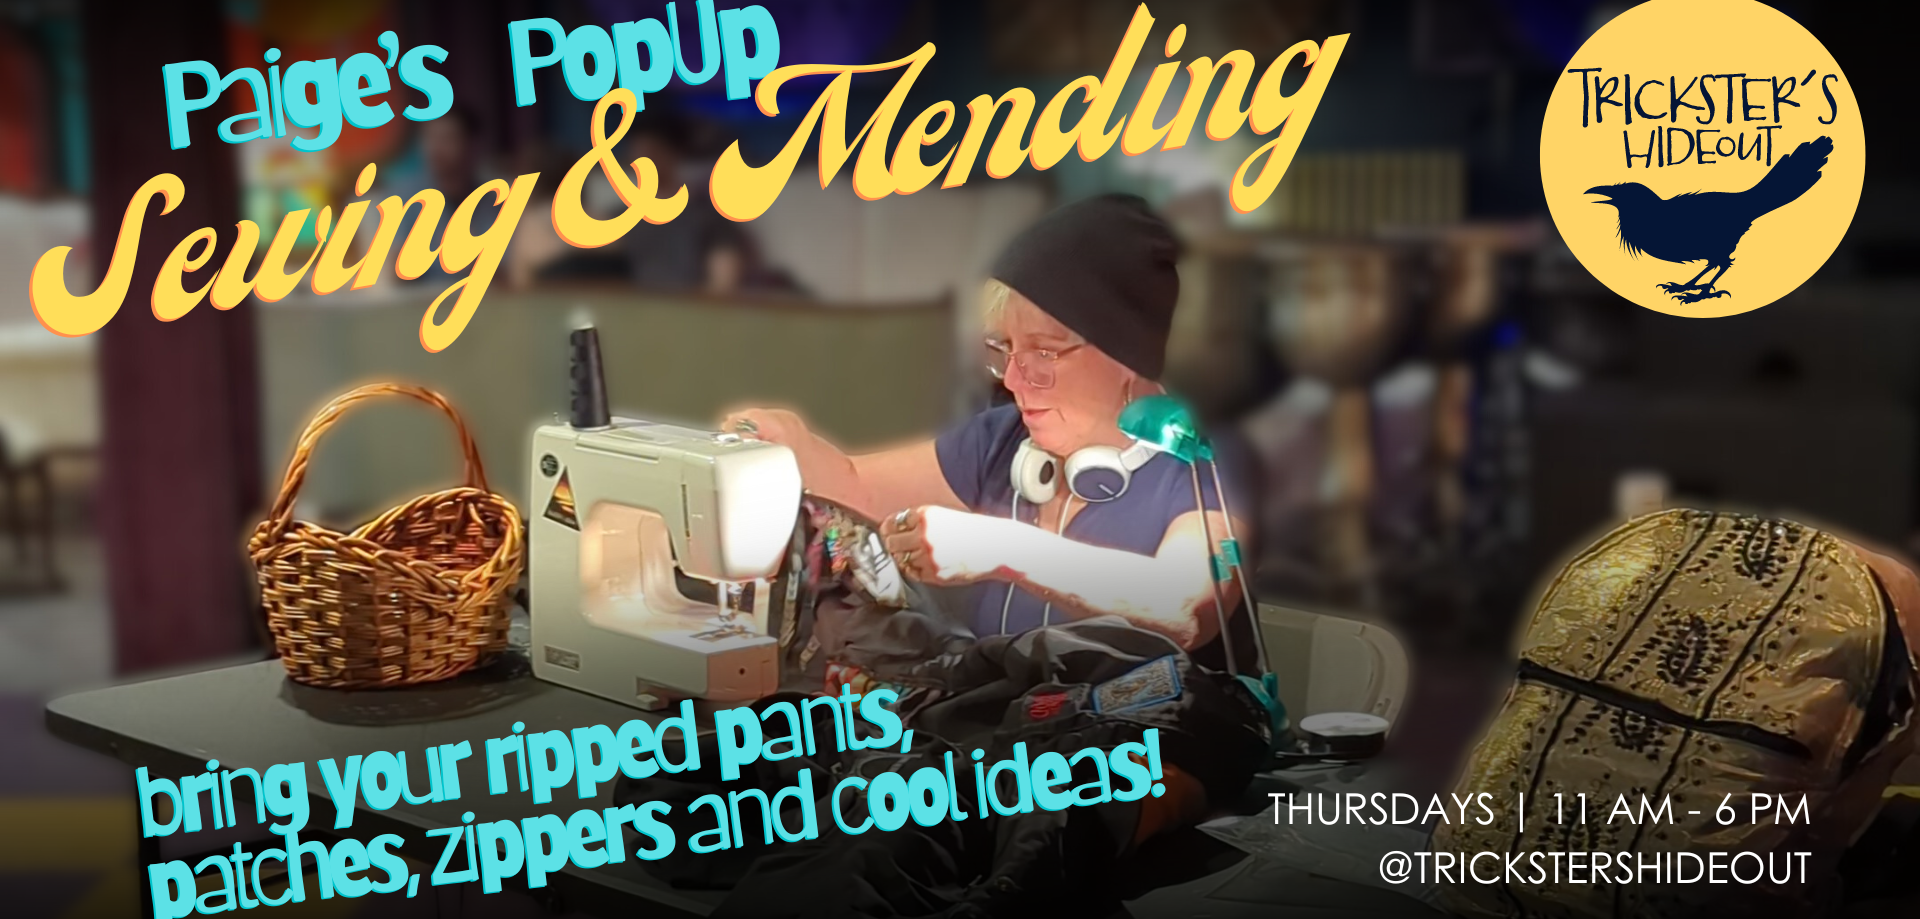 Paige's PopUp Sewing & Mending